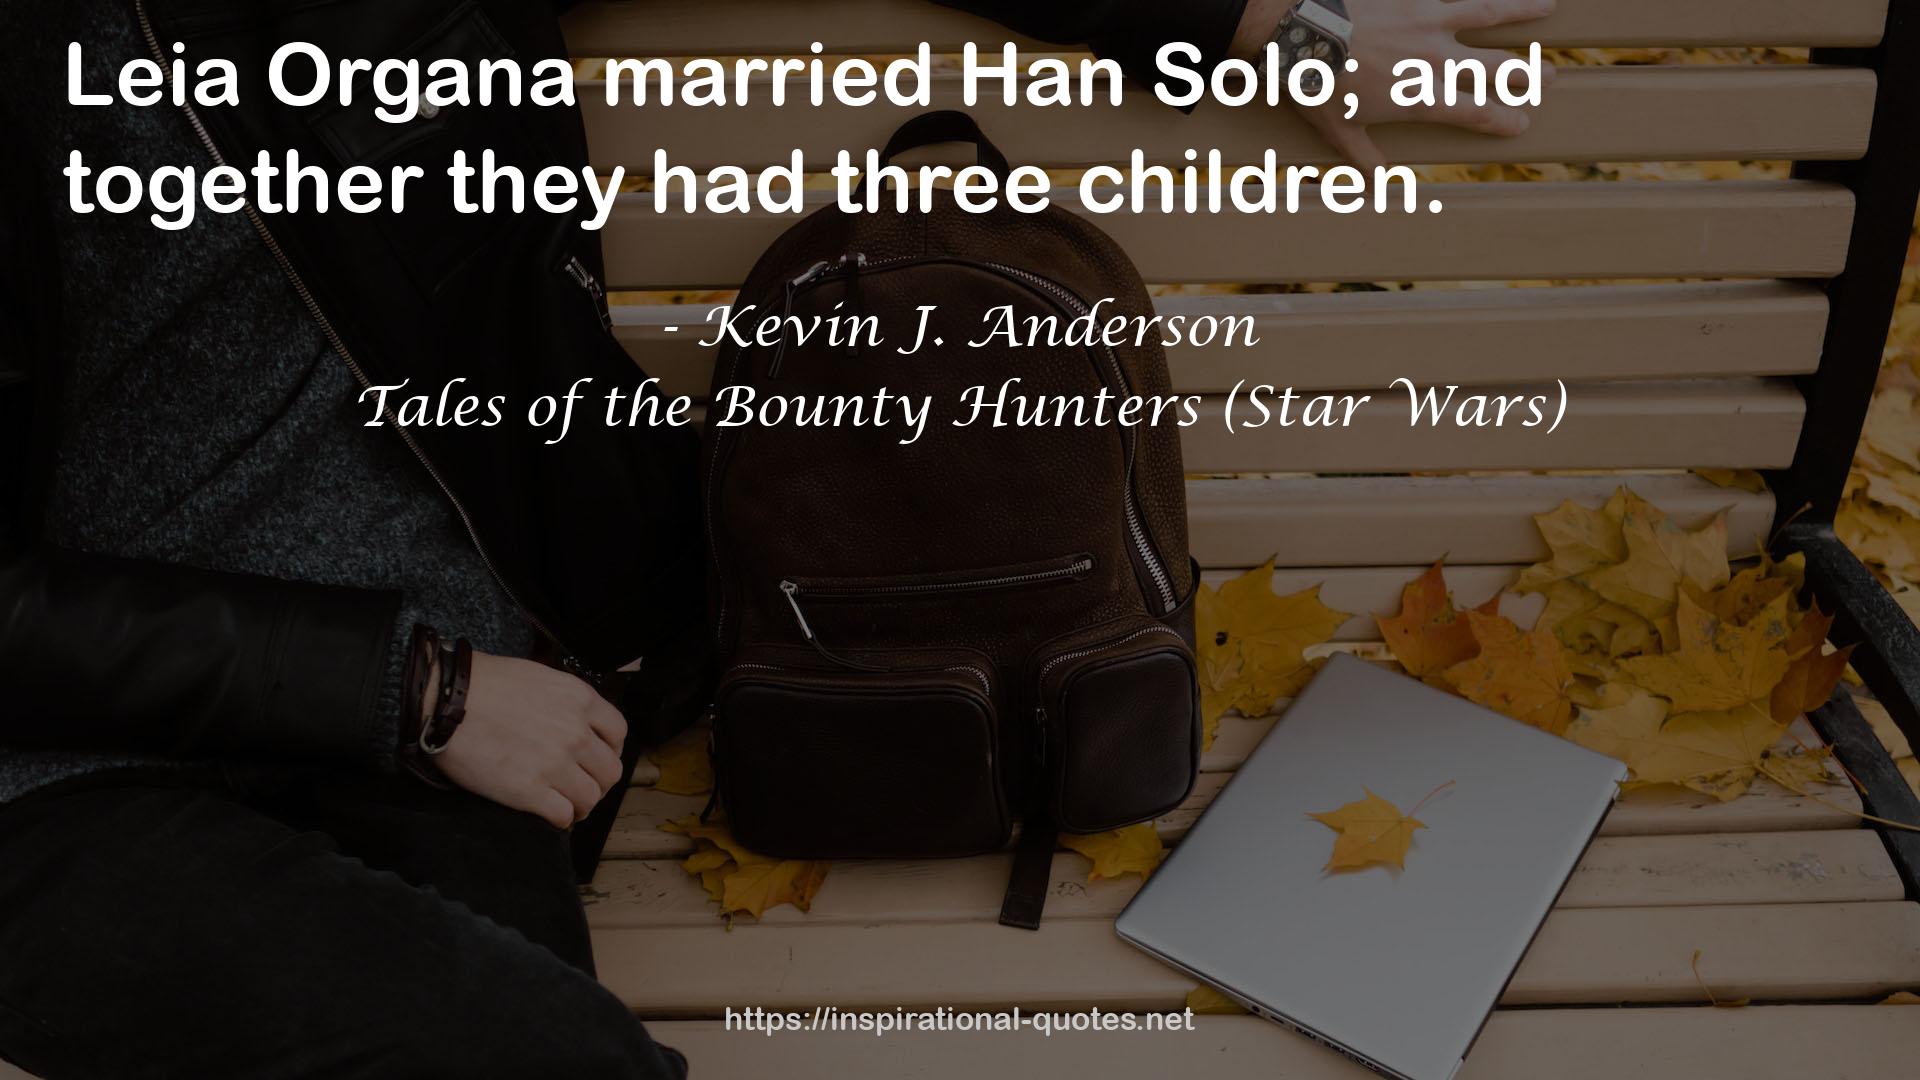 Tales of the Bounty Hunters (Star Wars) QUOTES